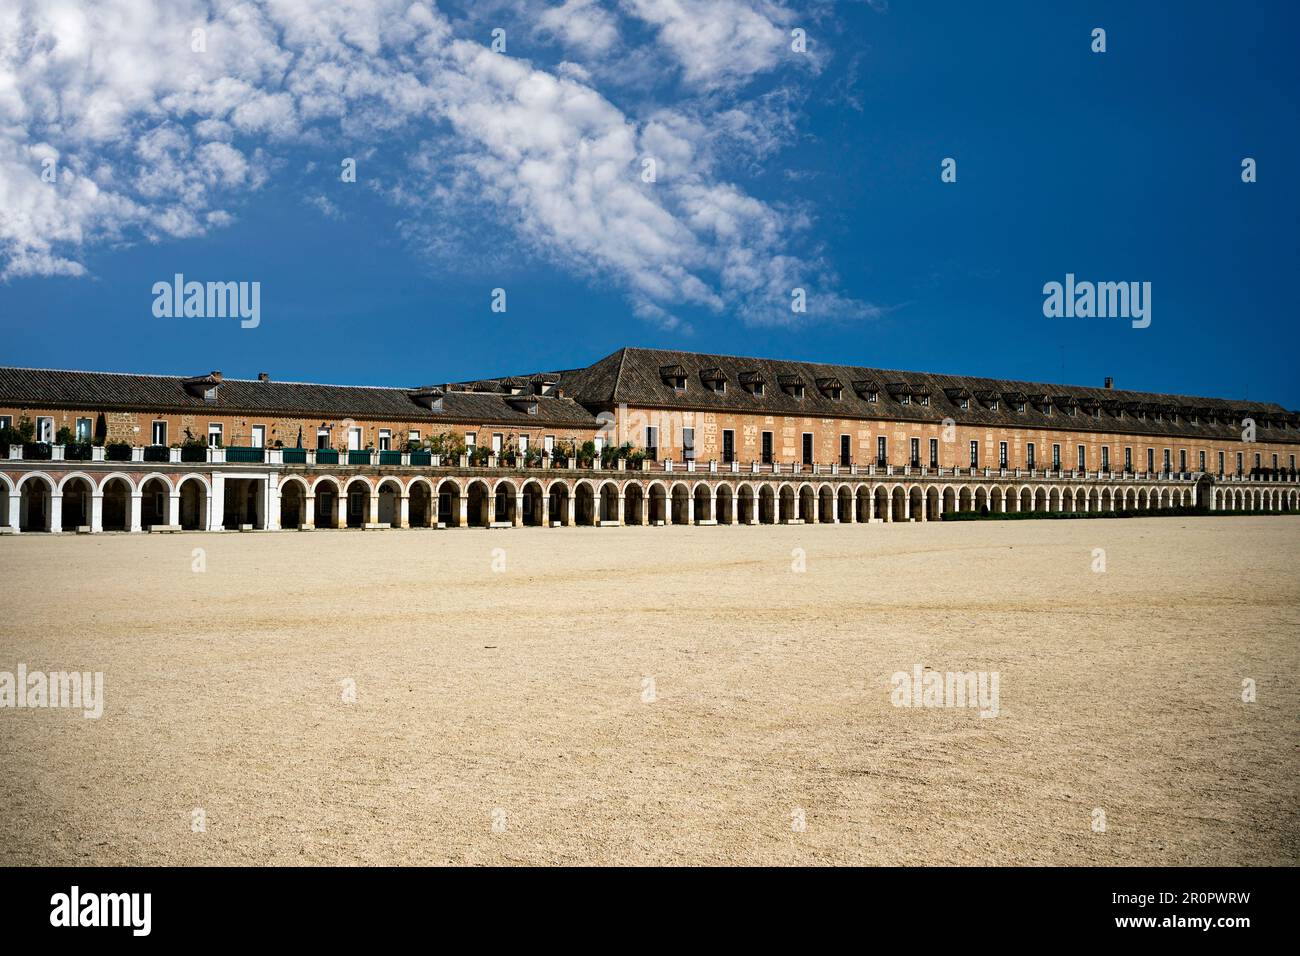 Plaza de Parejas next to the Royal Palace of Aranjuez, Madrid, Spain with a historic porticoed building in the background Stock Photo